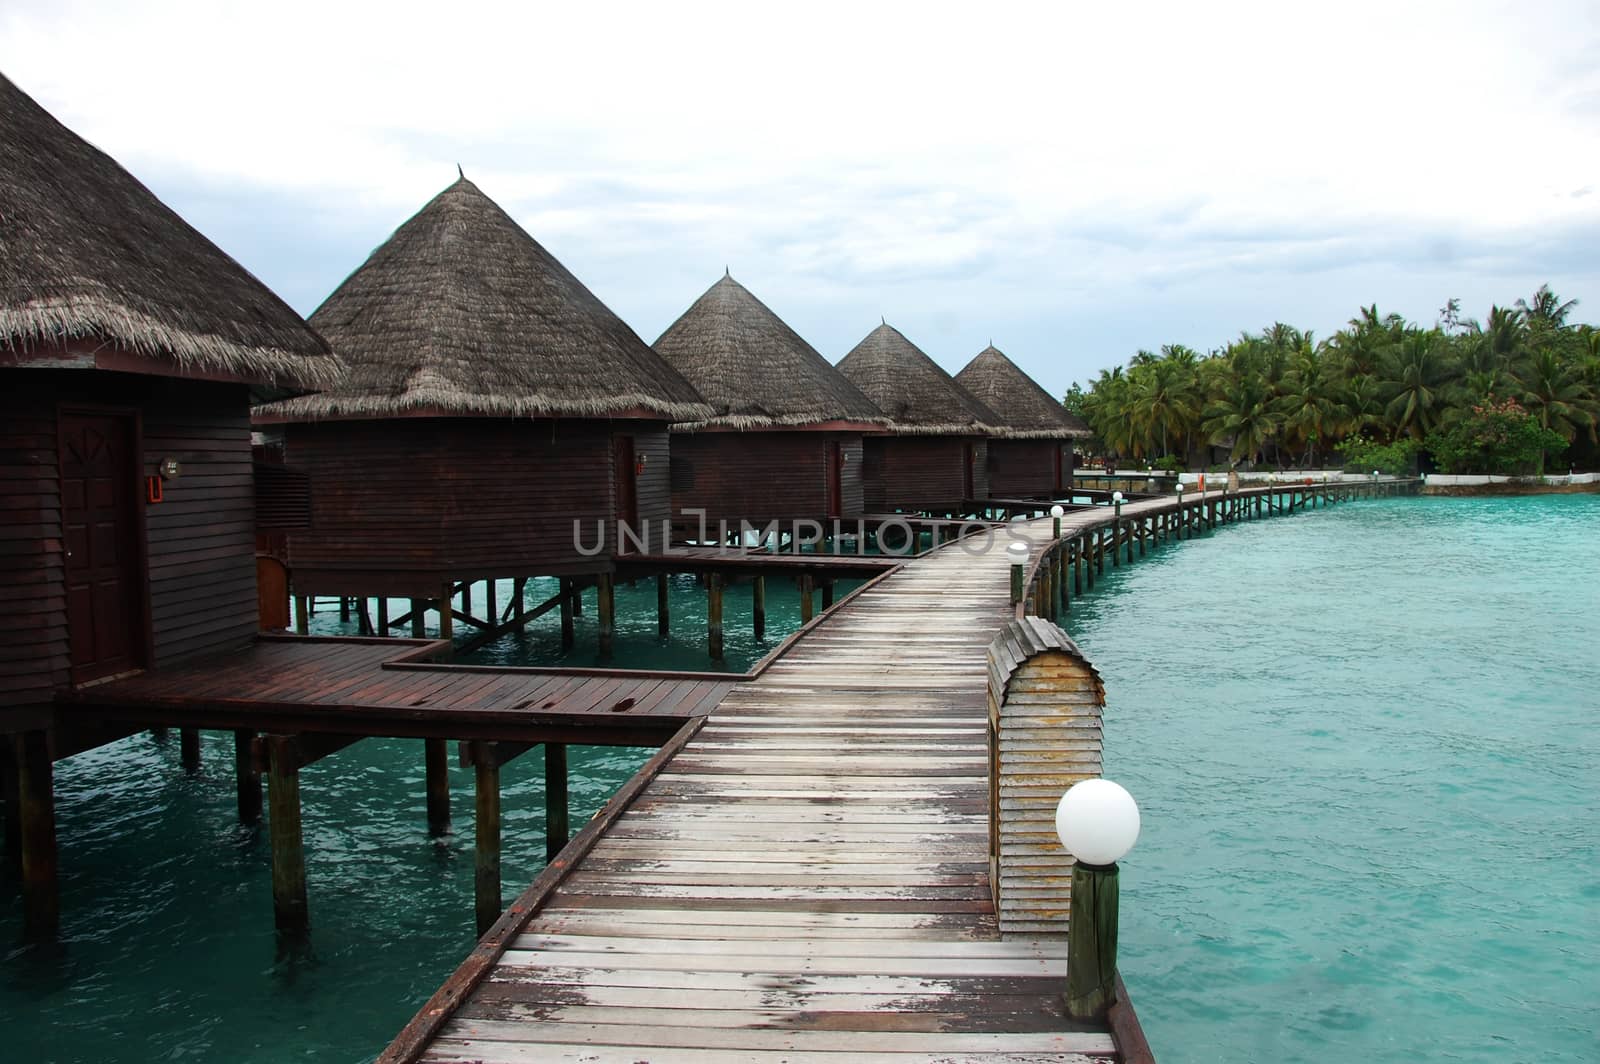 Bungalow and timber pier at island resort Maldives by danemo